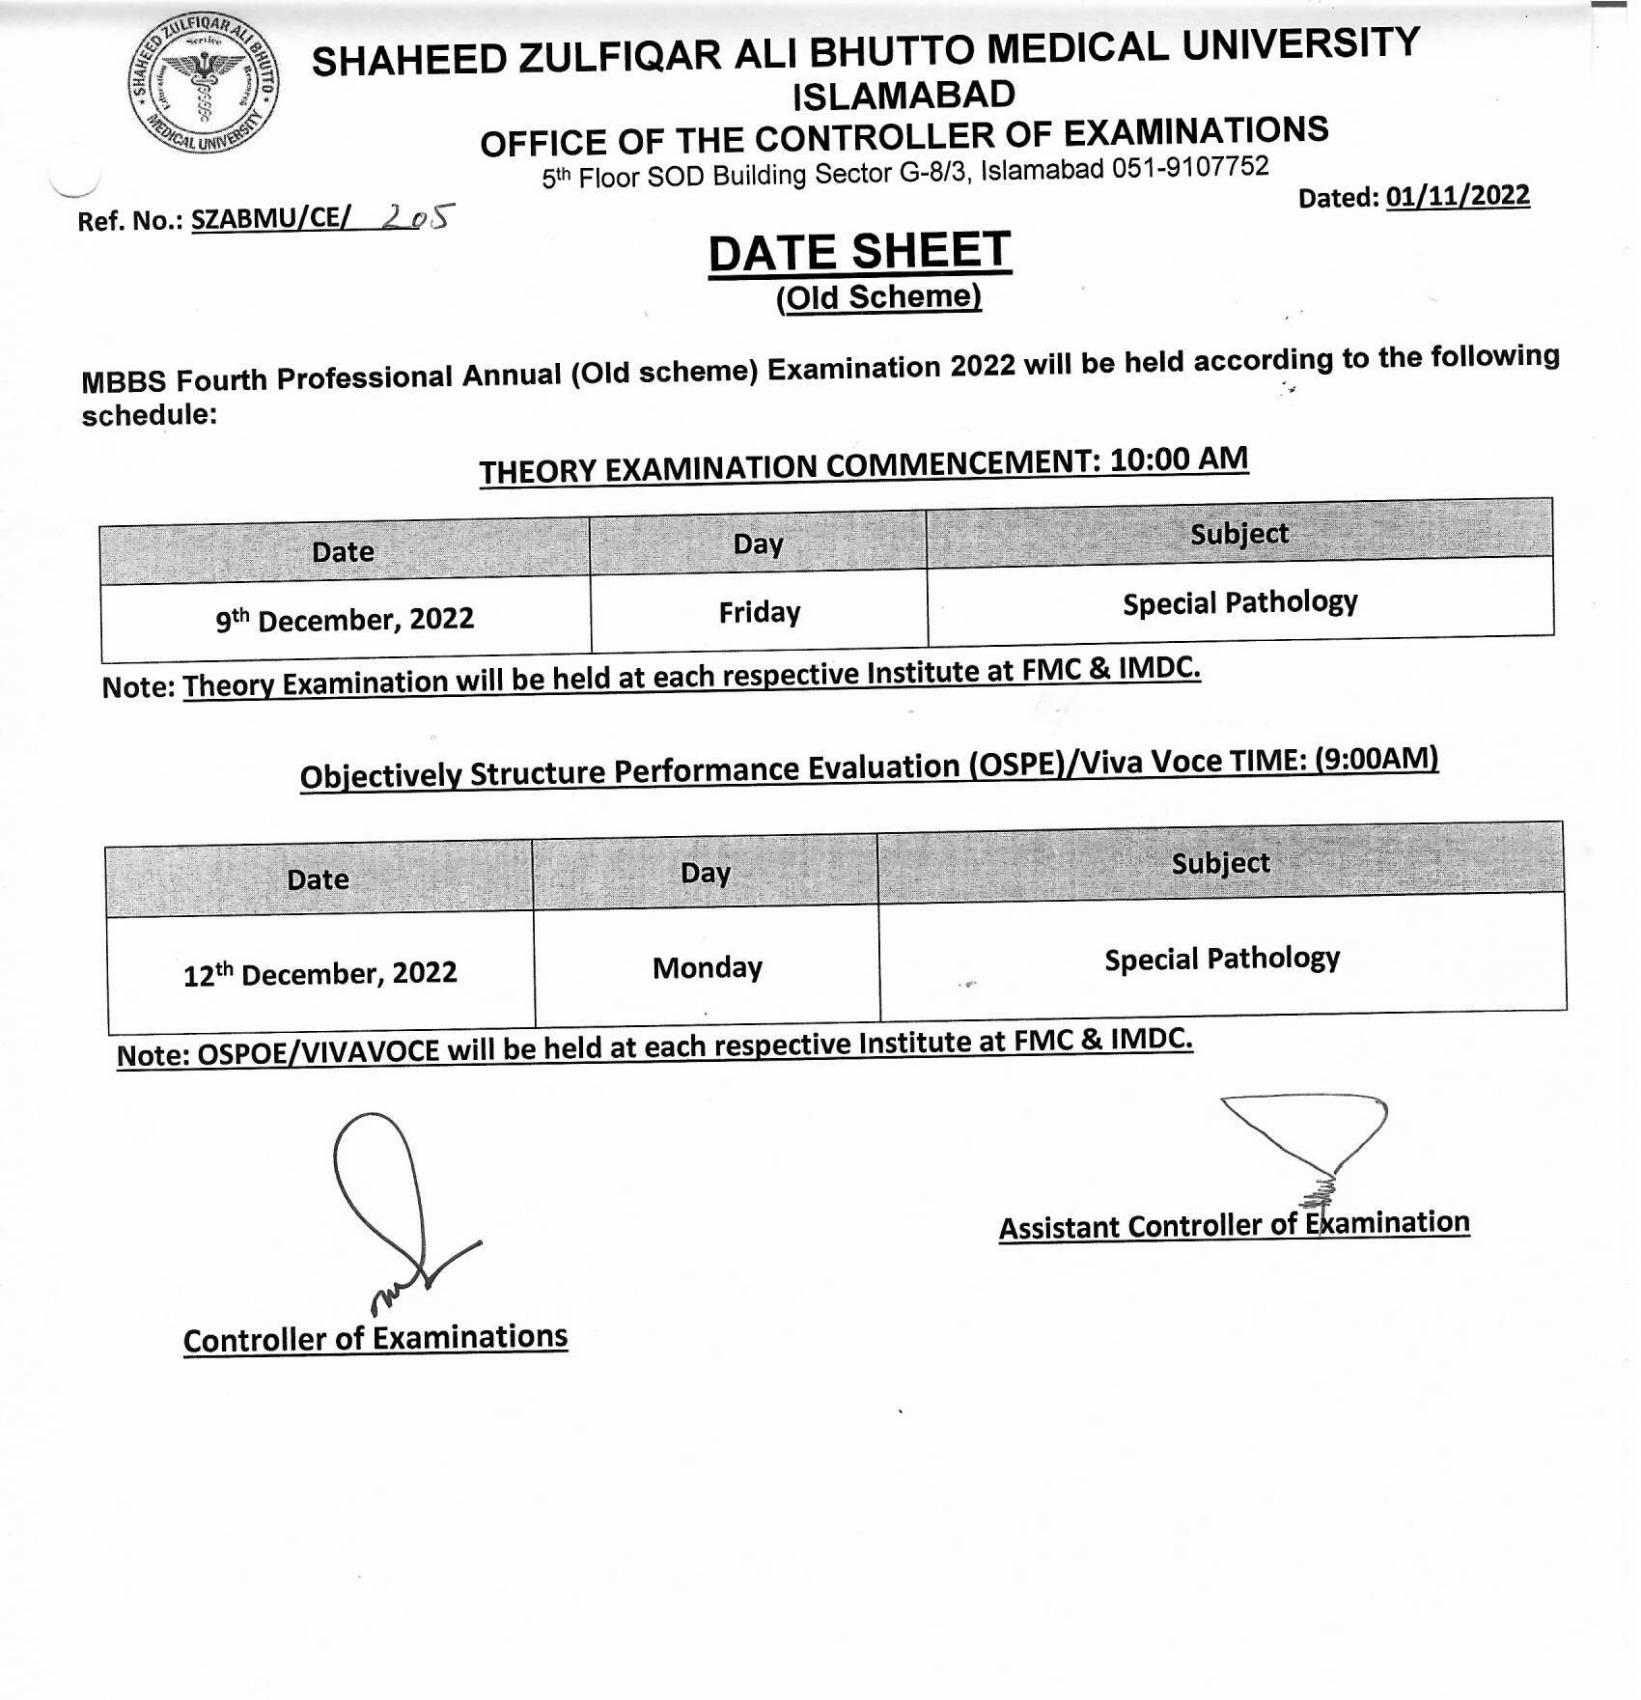 Date Sheet - MBBS 4th Professional Annual (old Scheme) Examination 2022